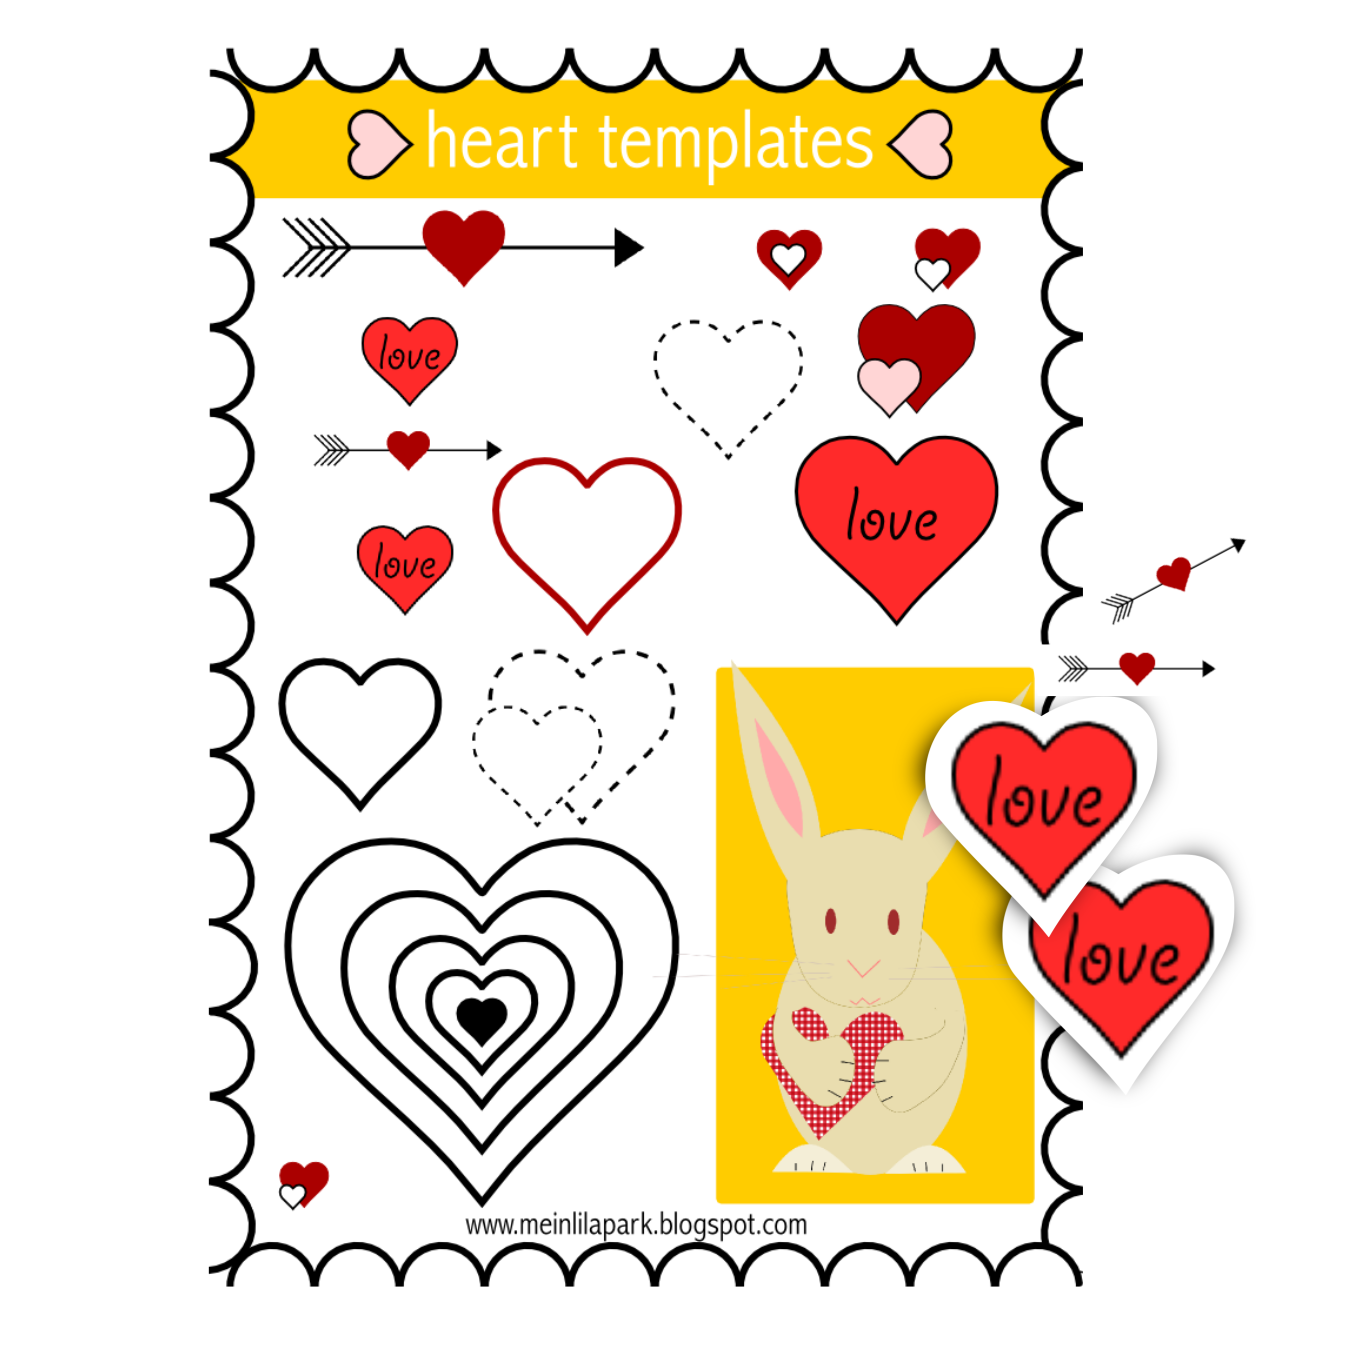 Cute Stickers for Valentines Day- Printable Valentines Day